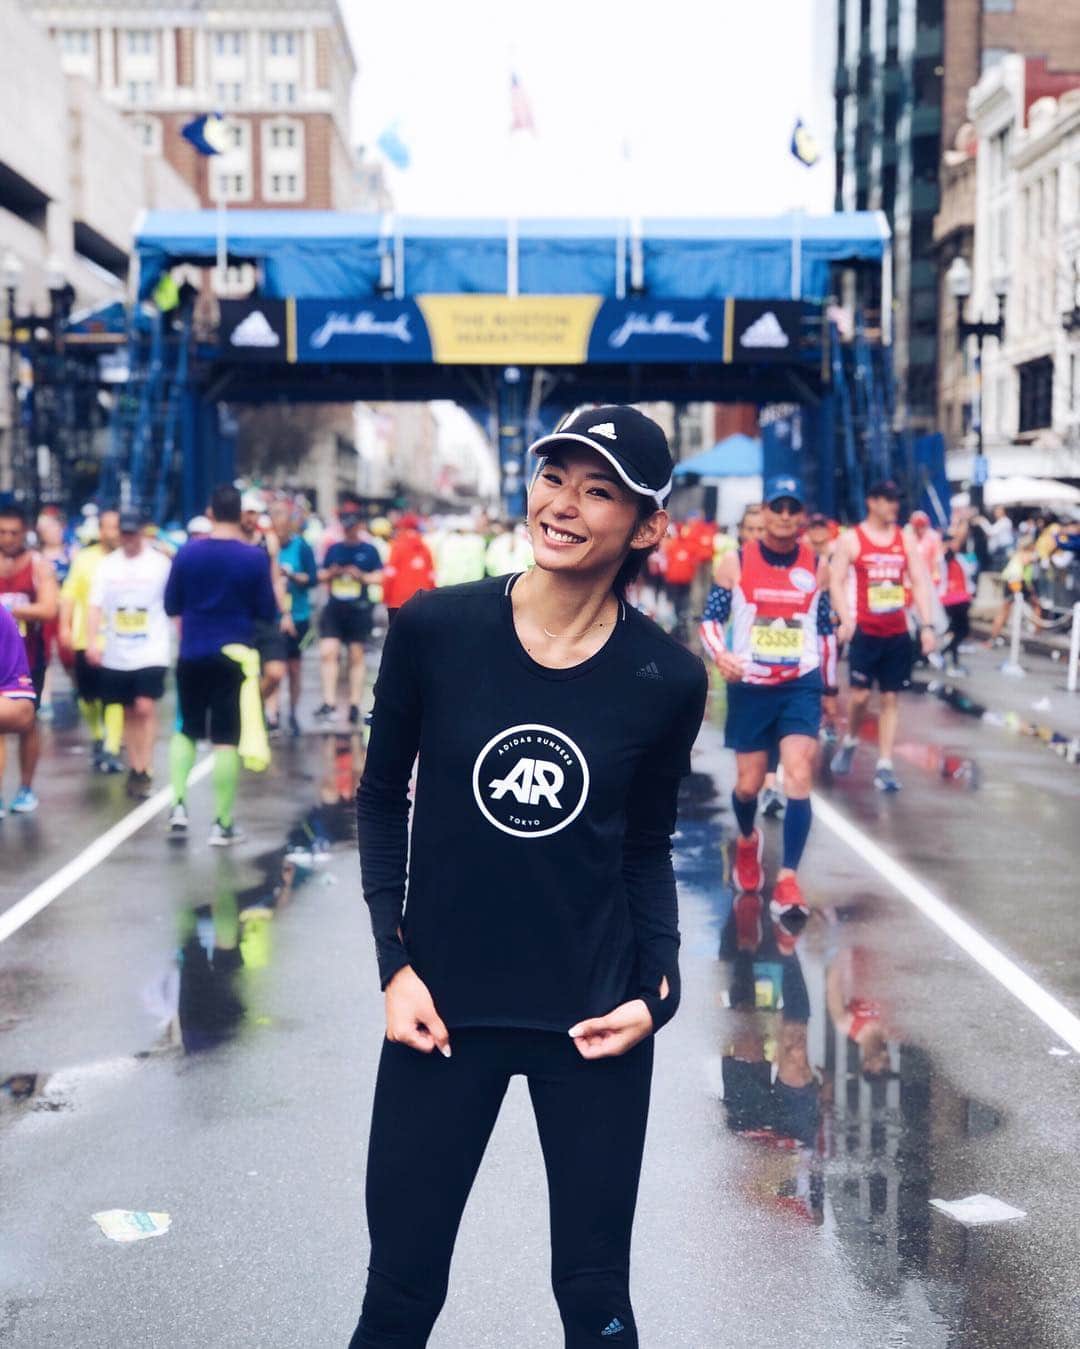 福田萌子さんのインスタグラム写真 - (福田萌子Instagram)「Running around the 8 cities of Massachusetts!! The Boston Marathon leads directly through eight cities and towns in Massachusetts🏃‍♀️🇺🇸 The red brick buildings in Boston offer an European feeling and relate back to its history as a British colony. Earlier known as an industrial hub for economic development, Massachusetts is now a hub for education and high-tech industries. There are advanced universities such as the Massachusetts Institute of Technology as well as the world famous and oldest US University, Harvard, which among others you can eye witness along the Boston Marathon course‼️ Boston Marathon is the best way to explore the city and a wonderful 42km long learning journey😉👩‍🎓🌏And above all, thank you very much for the continuous roadside cheering as well as all the hardworking volunteers🙏✨❣️ ・ ボストンマラソンはマサチューセッツ州の８つの市と街を一直線に走り抜けるコースです。 イギリスの植民地としての歴史を持つボストンはヨーロッパの雰囲気を残す赤煉瓦の建物の景色が広がります。 産業の中心として経済発展を遂げたマサチューセッツ州は今では教育とハイテク産業の中心地になっています。皆さんもご存知のアメリカ最古のハーバード大学をはじめ、マサチューセッツ工科大学などの上級大学がありボストンマラソンのコースでも沢山の大学を沿道に見ることが出来ました。 42kmの旅で素晴らしい学びをくれるボストンマラソンに感謝。そして何より絶え間ない沿道の声援と多くのボランティアの方々に心から有難うございます🙏❤️✨ ・ #sportstraveler #スポーツトラベラー #bostonmarathon #bostonmarathon2019 #adidasrunners #adidaswomen #adidastokyo」4月16日 19時45分 - moekofukuda